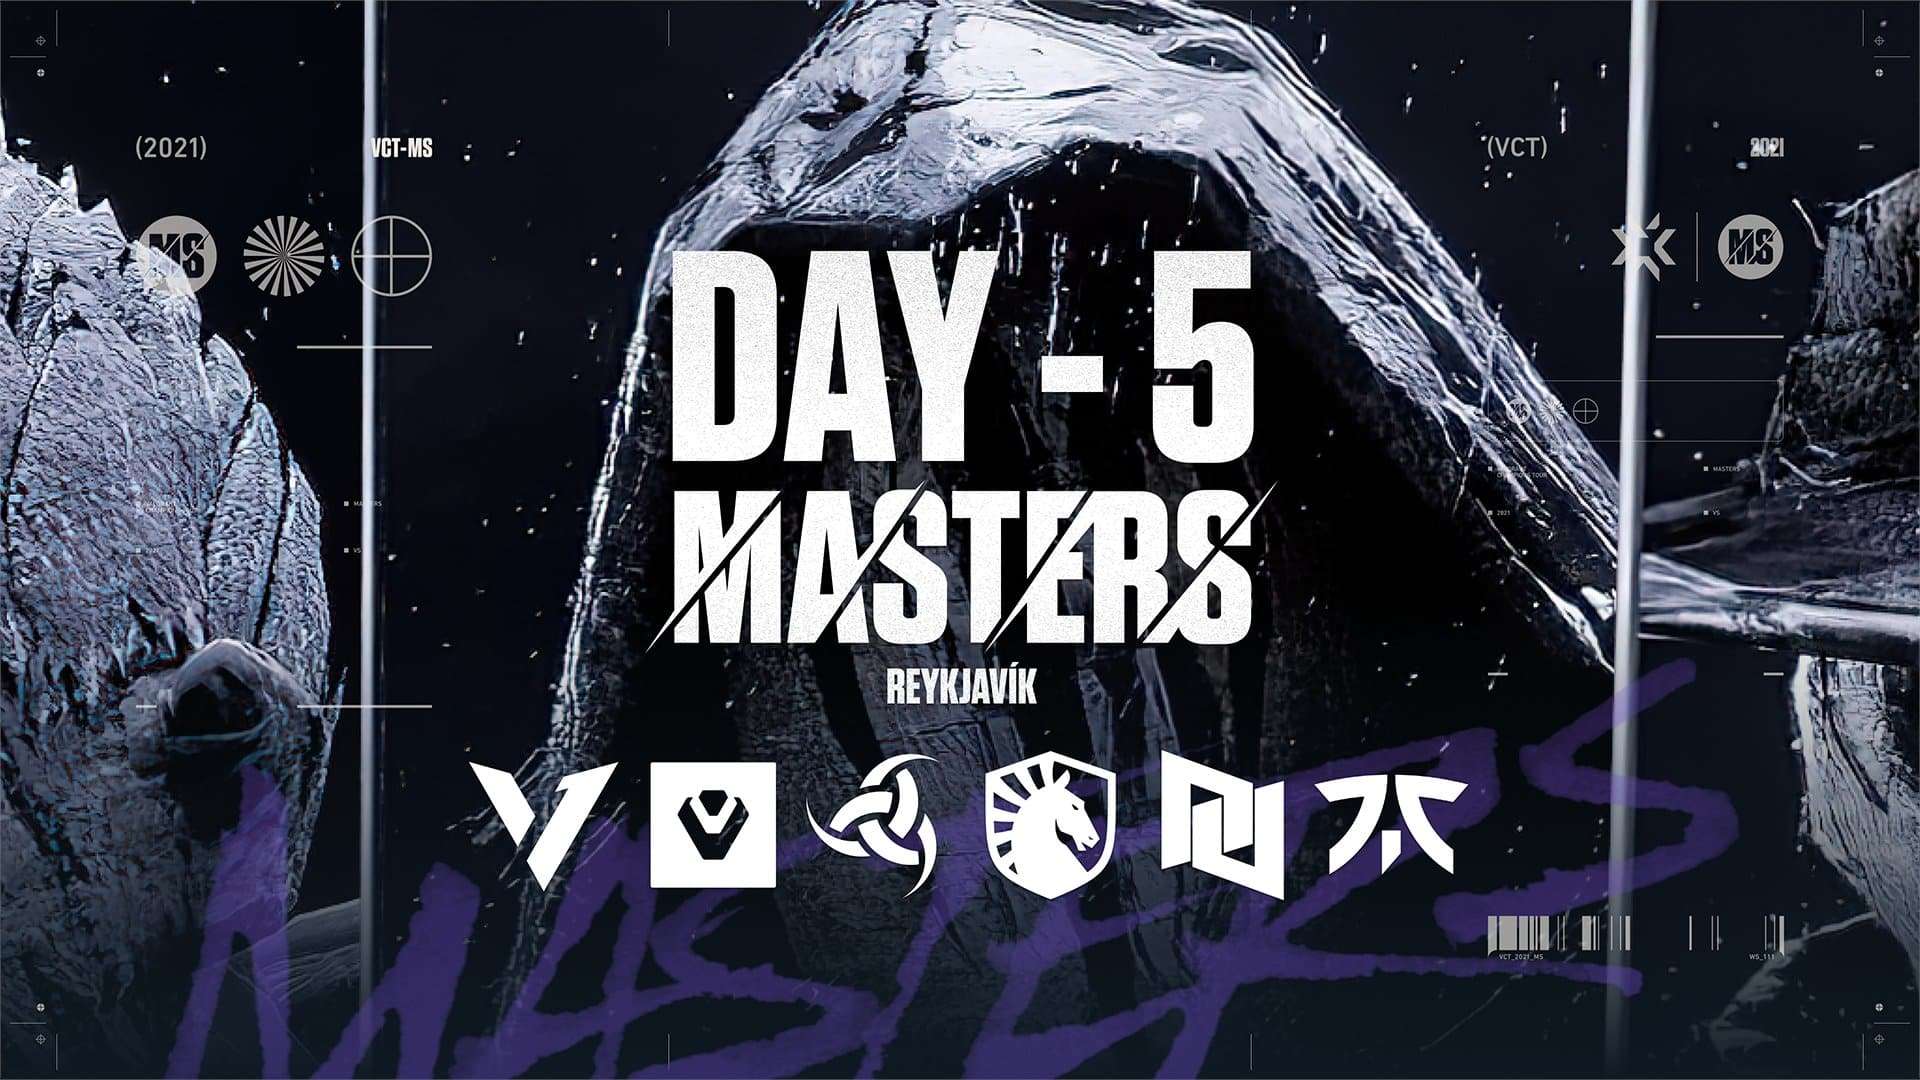 VCT Stage 2 Masters Iceland Day 5 preview